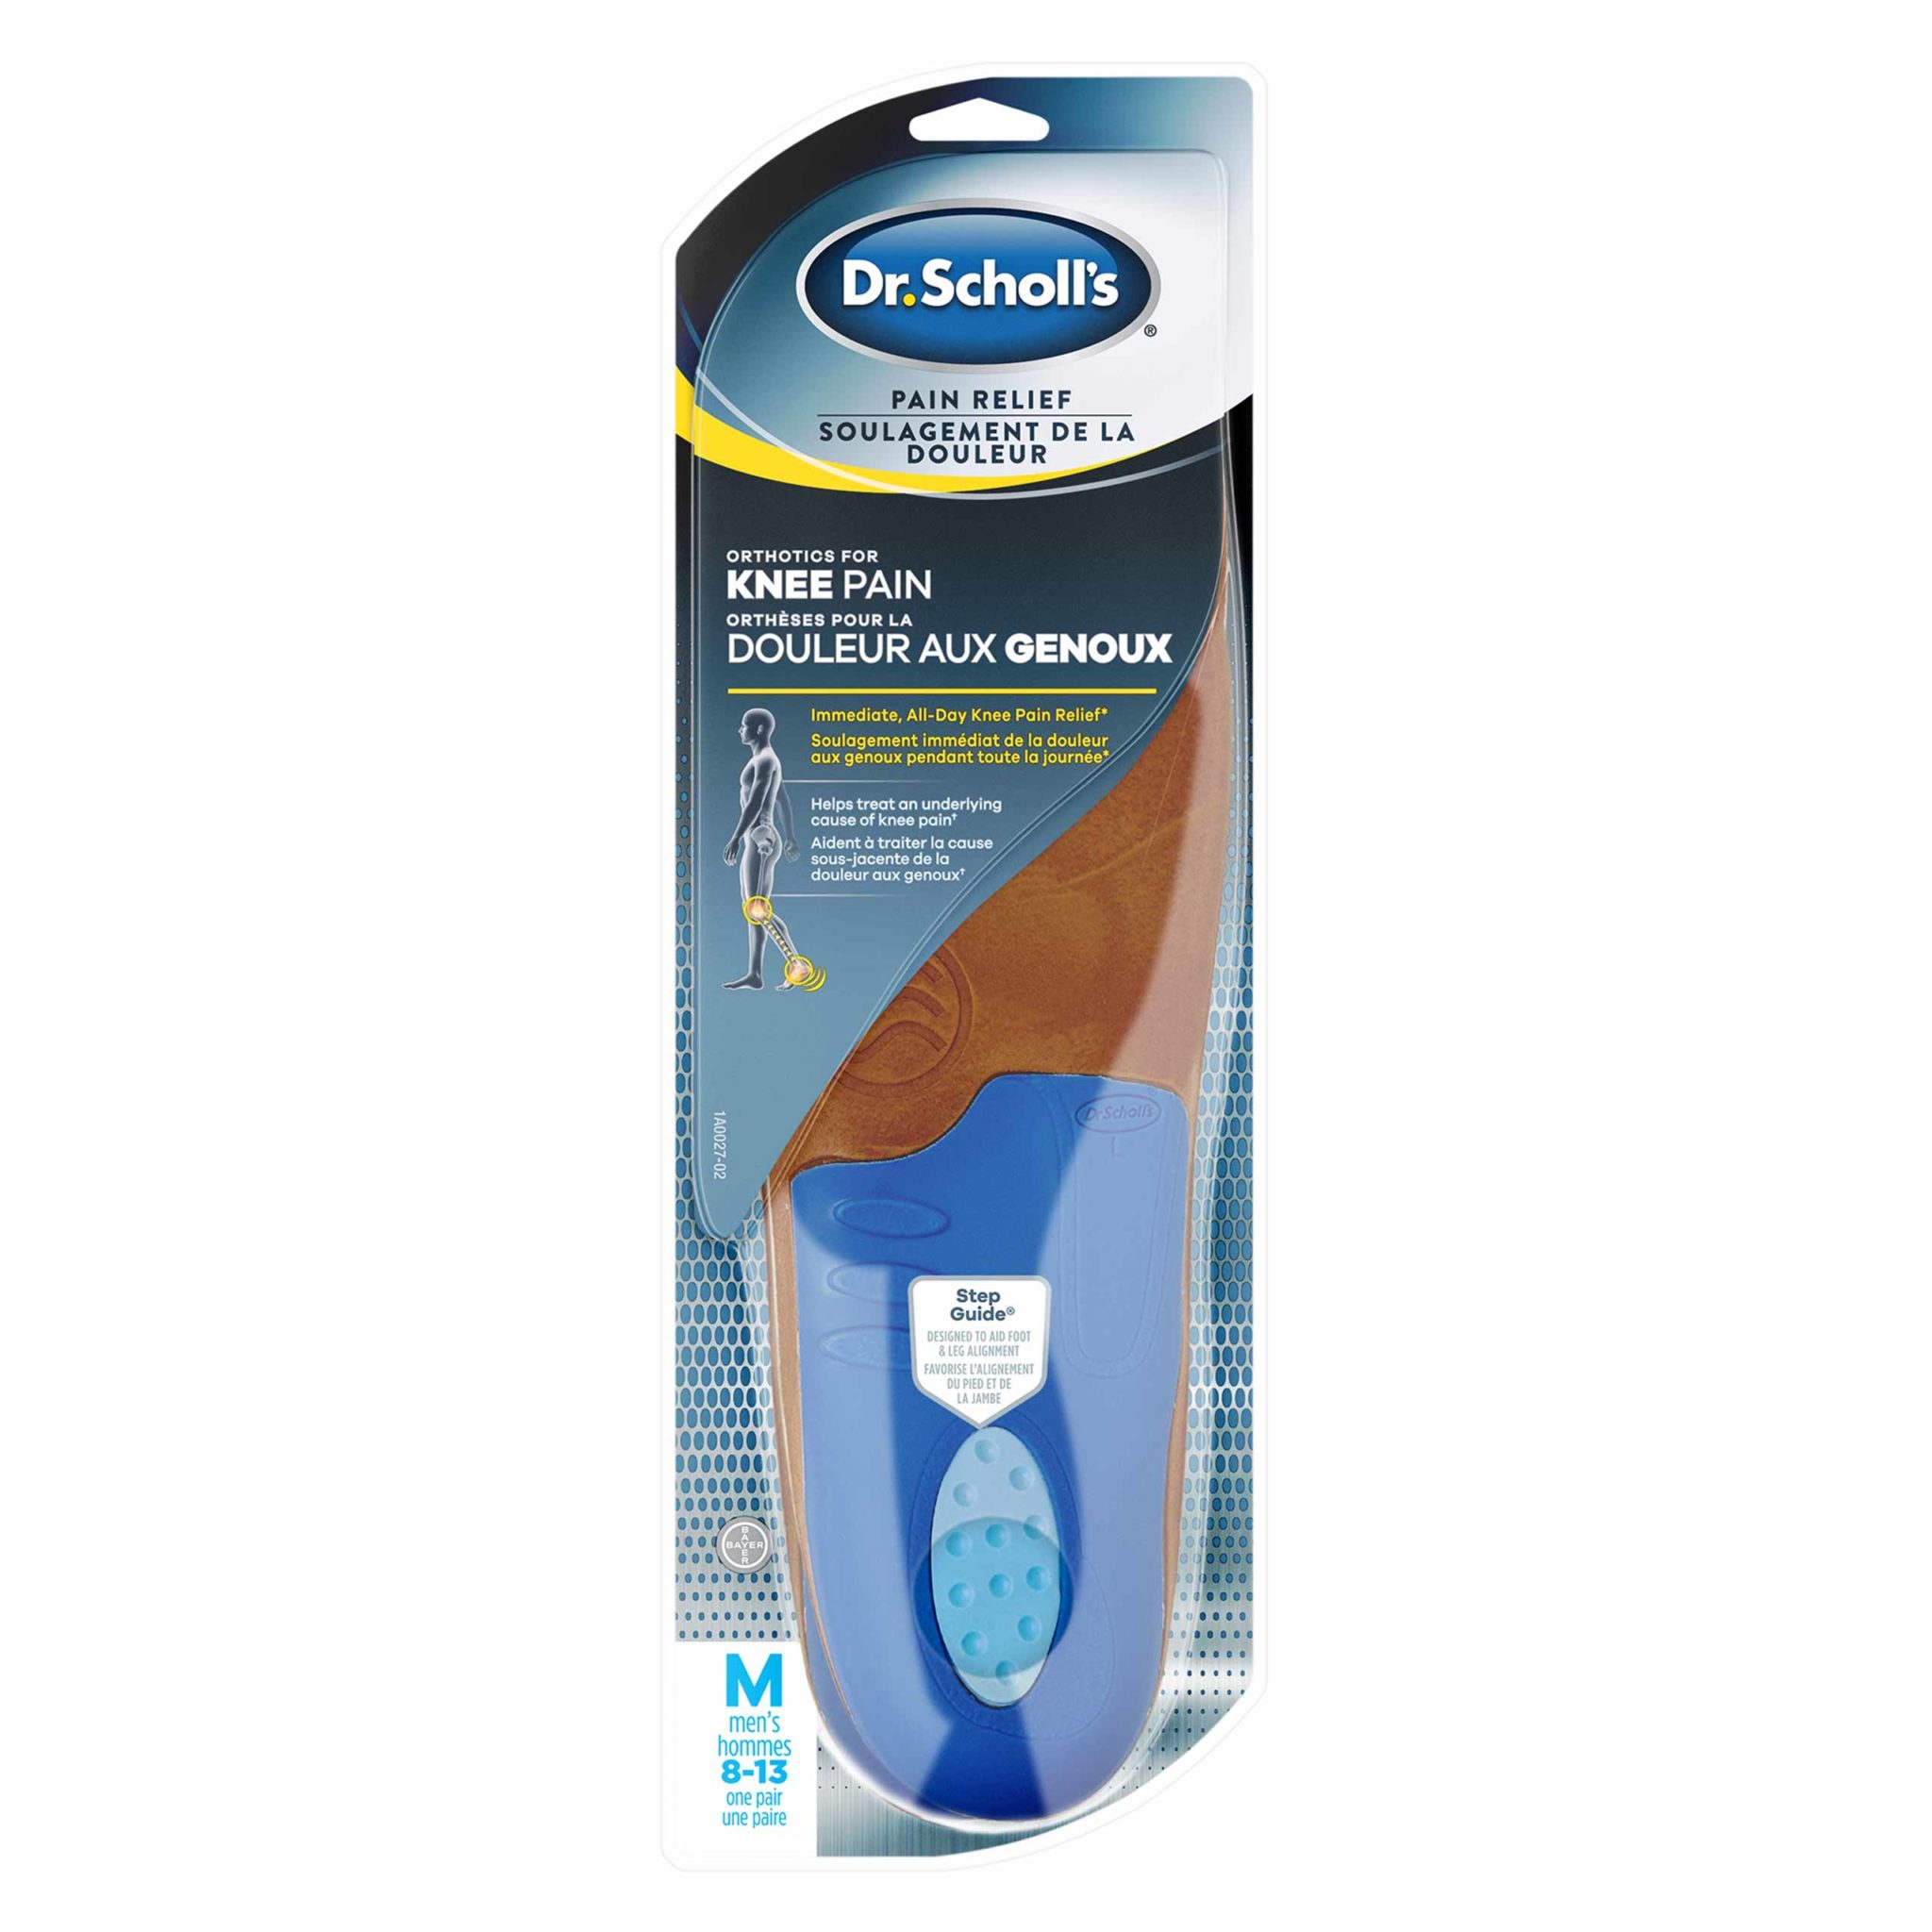 Pain Relief Orthotics for Knee Pain | Shoe Inserts, Orthotics and Foot ...